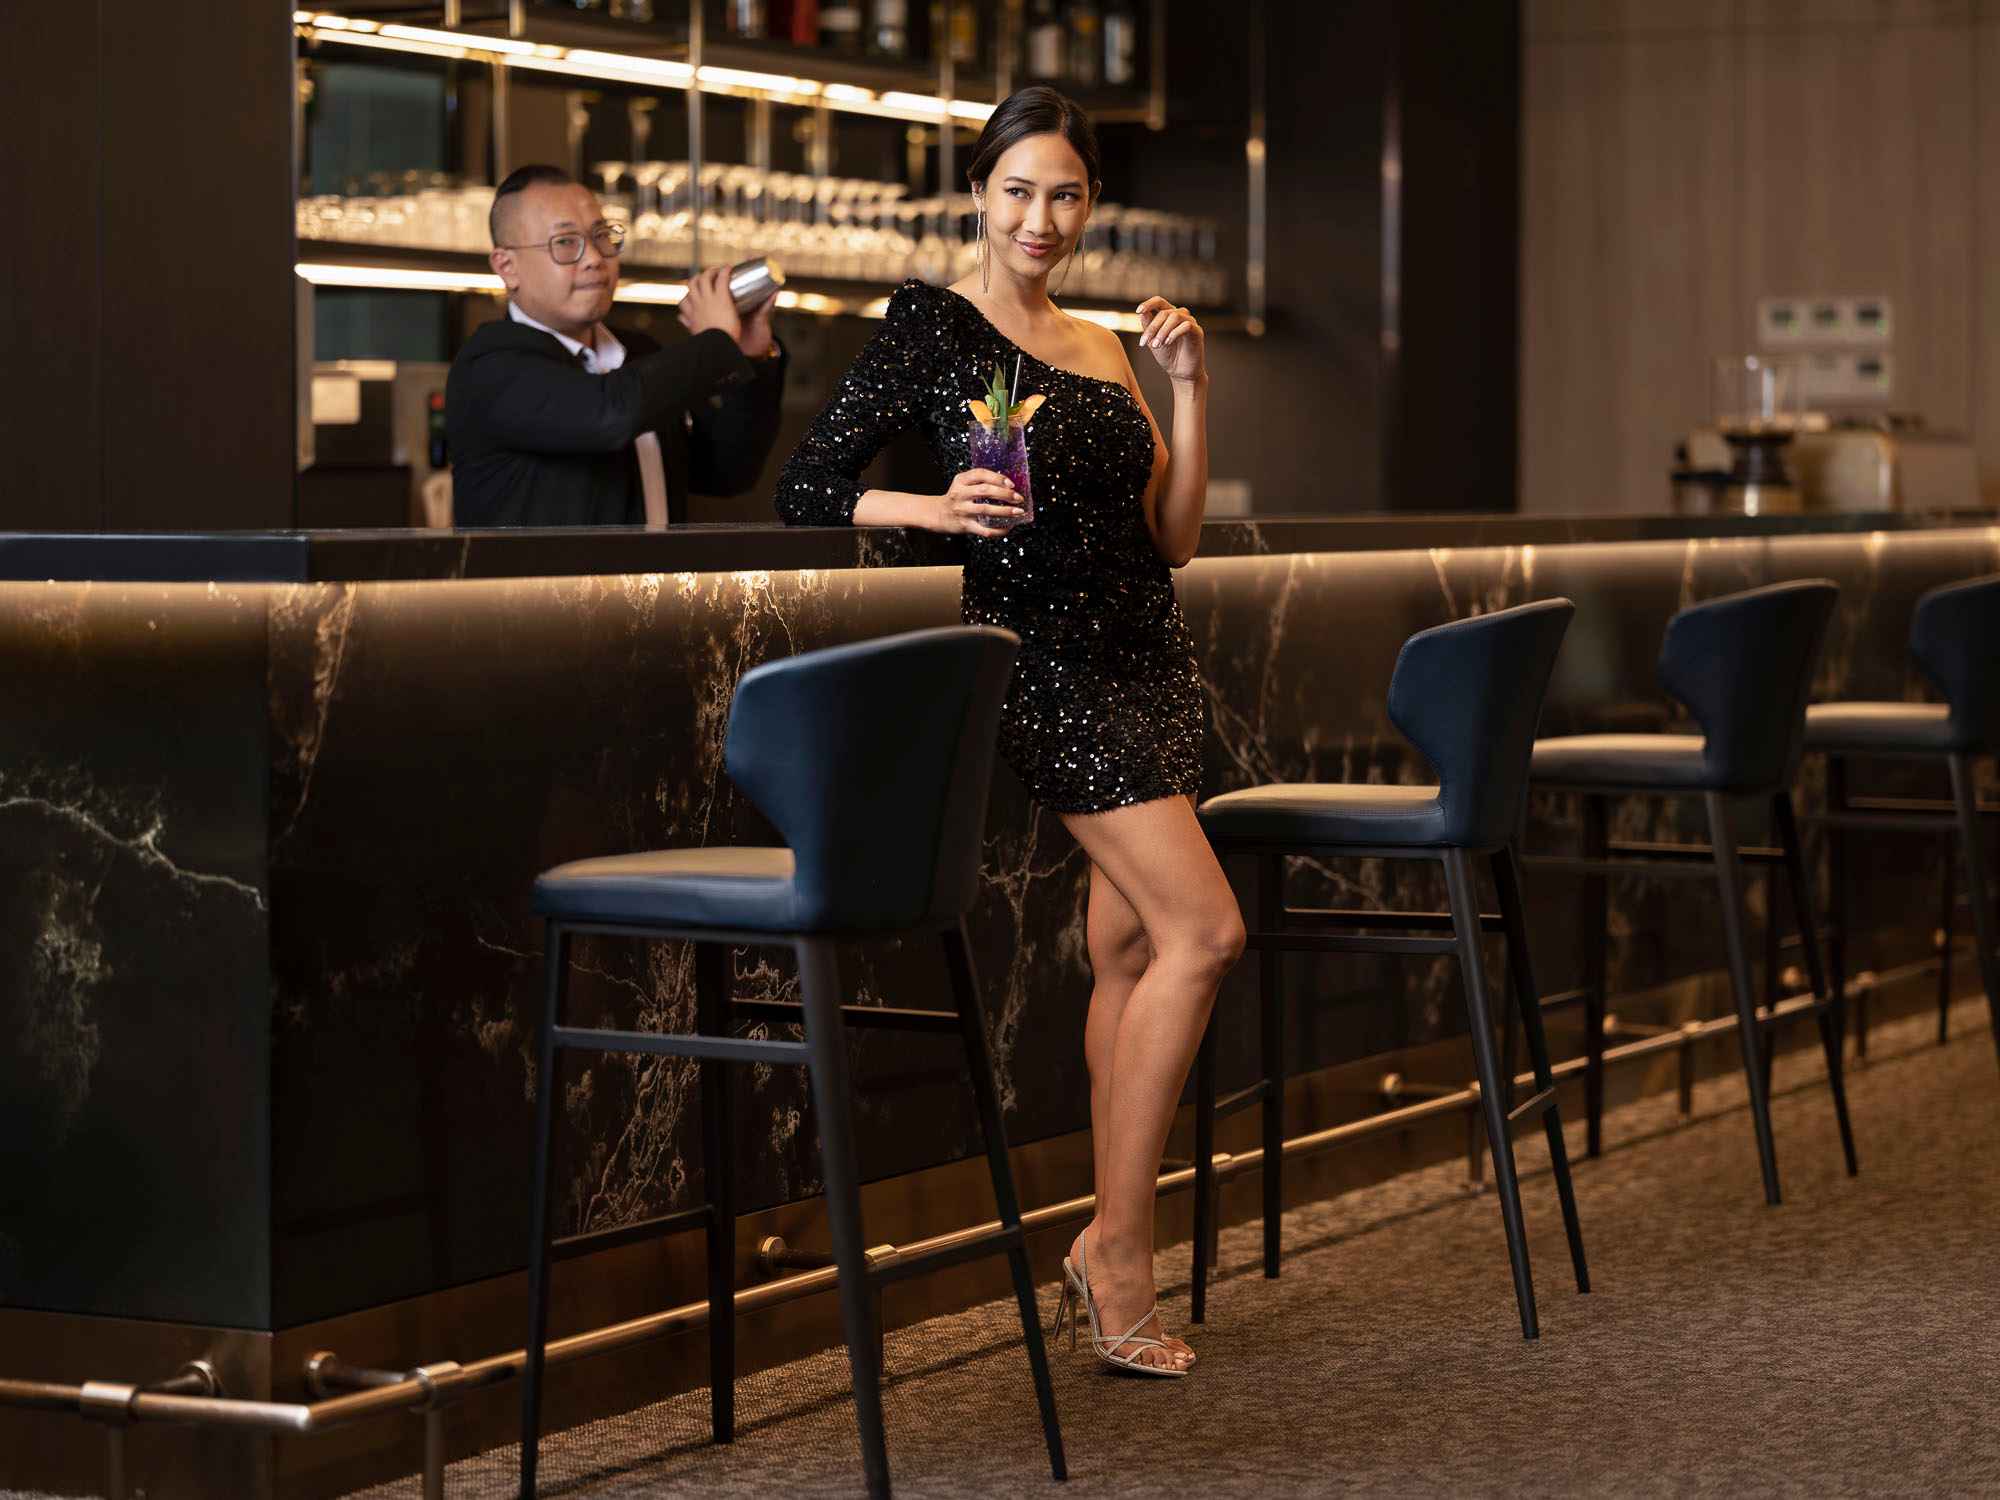 Lady enjoying a cocktail at Orchid Hotel, photo taken by coco creative studio lifestyle shoot-Orchid-lifestyle-interior-hospitality-photgraphy-coco-creative-studio-singapore-france